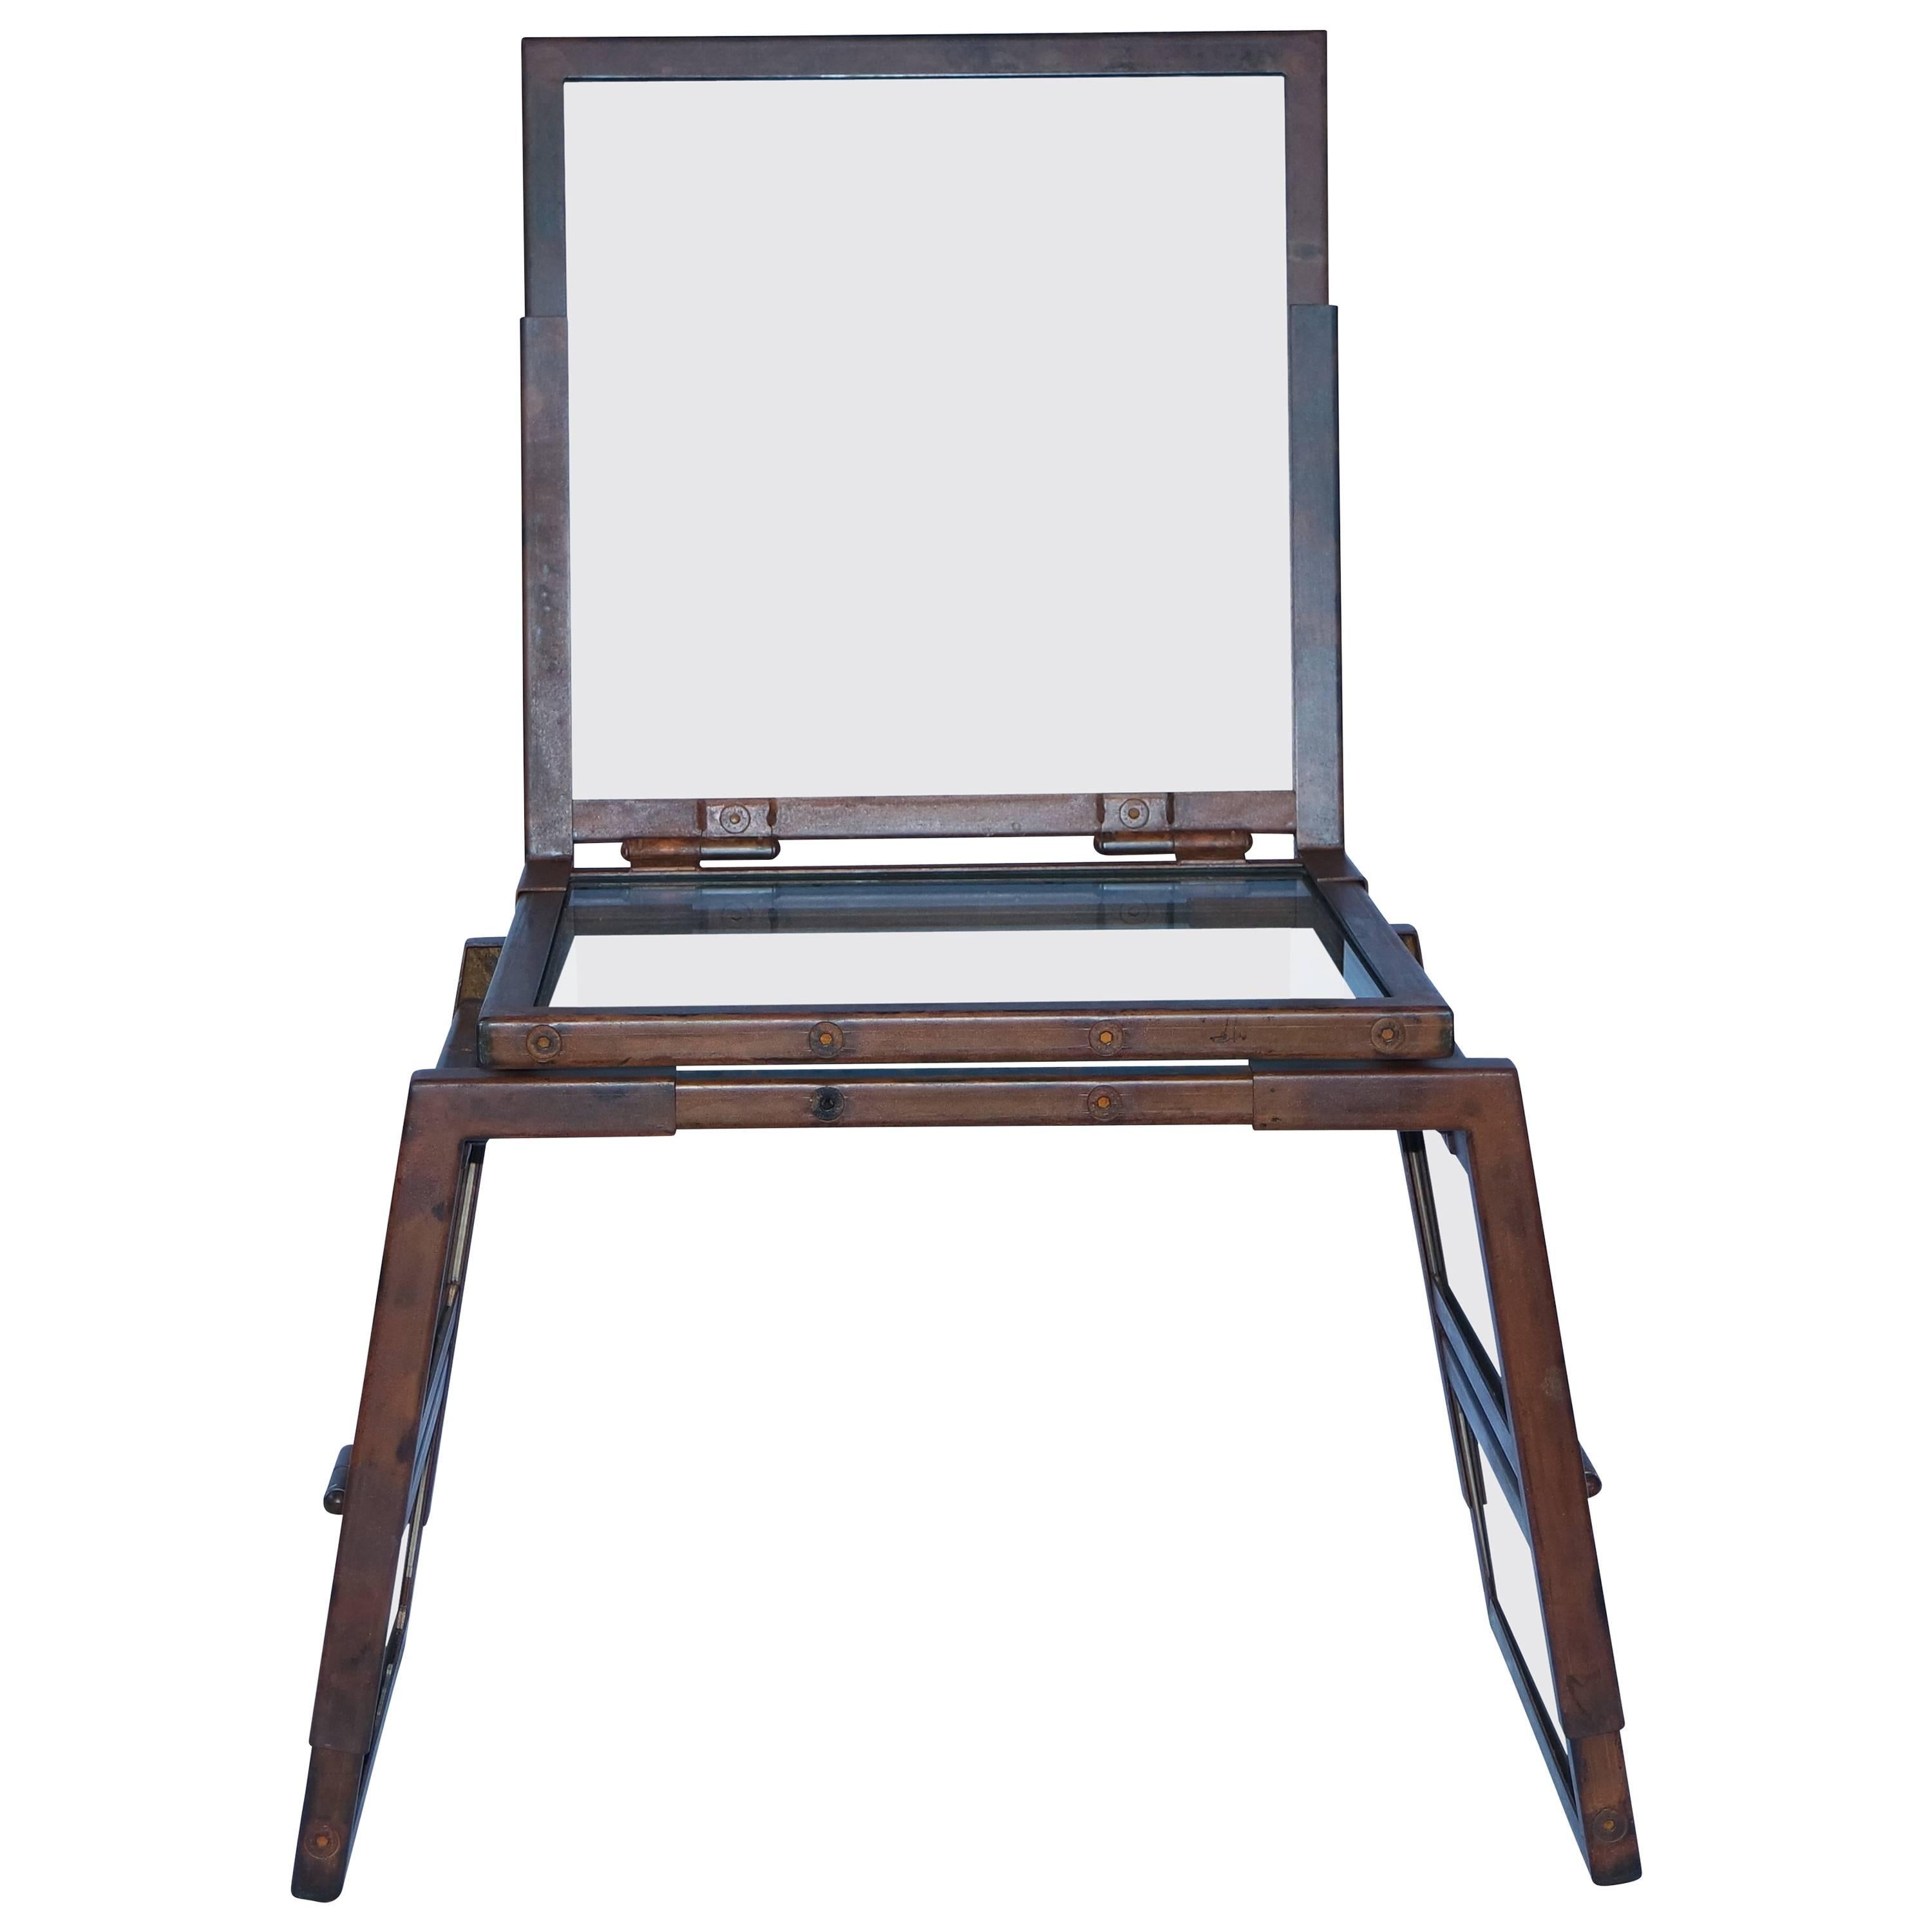 Folding Glass Chair Made with Italian Glass and Oxidized Steel Treated